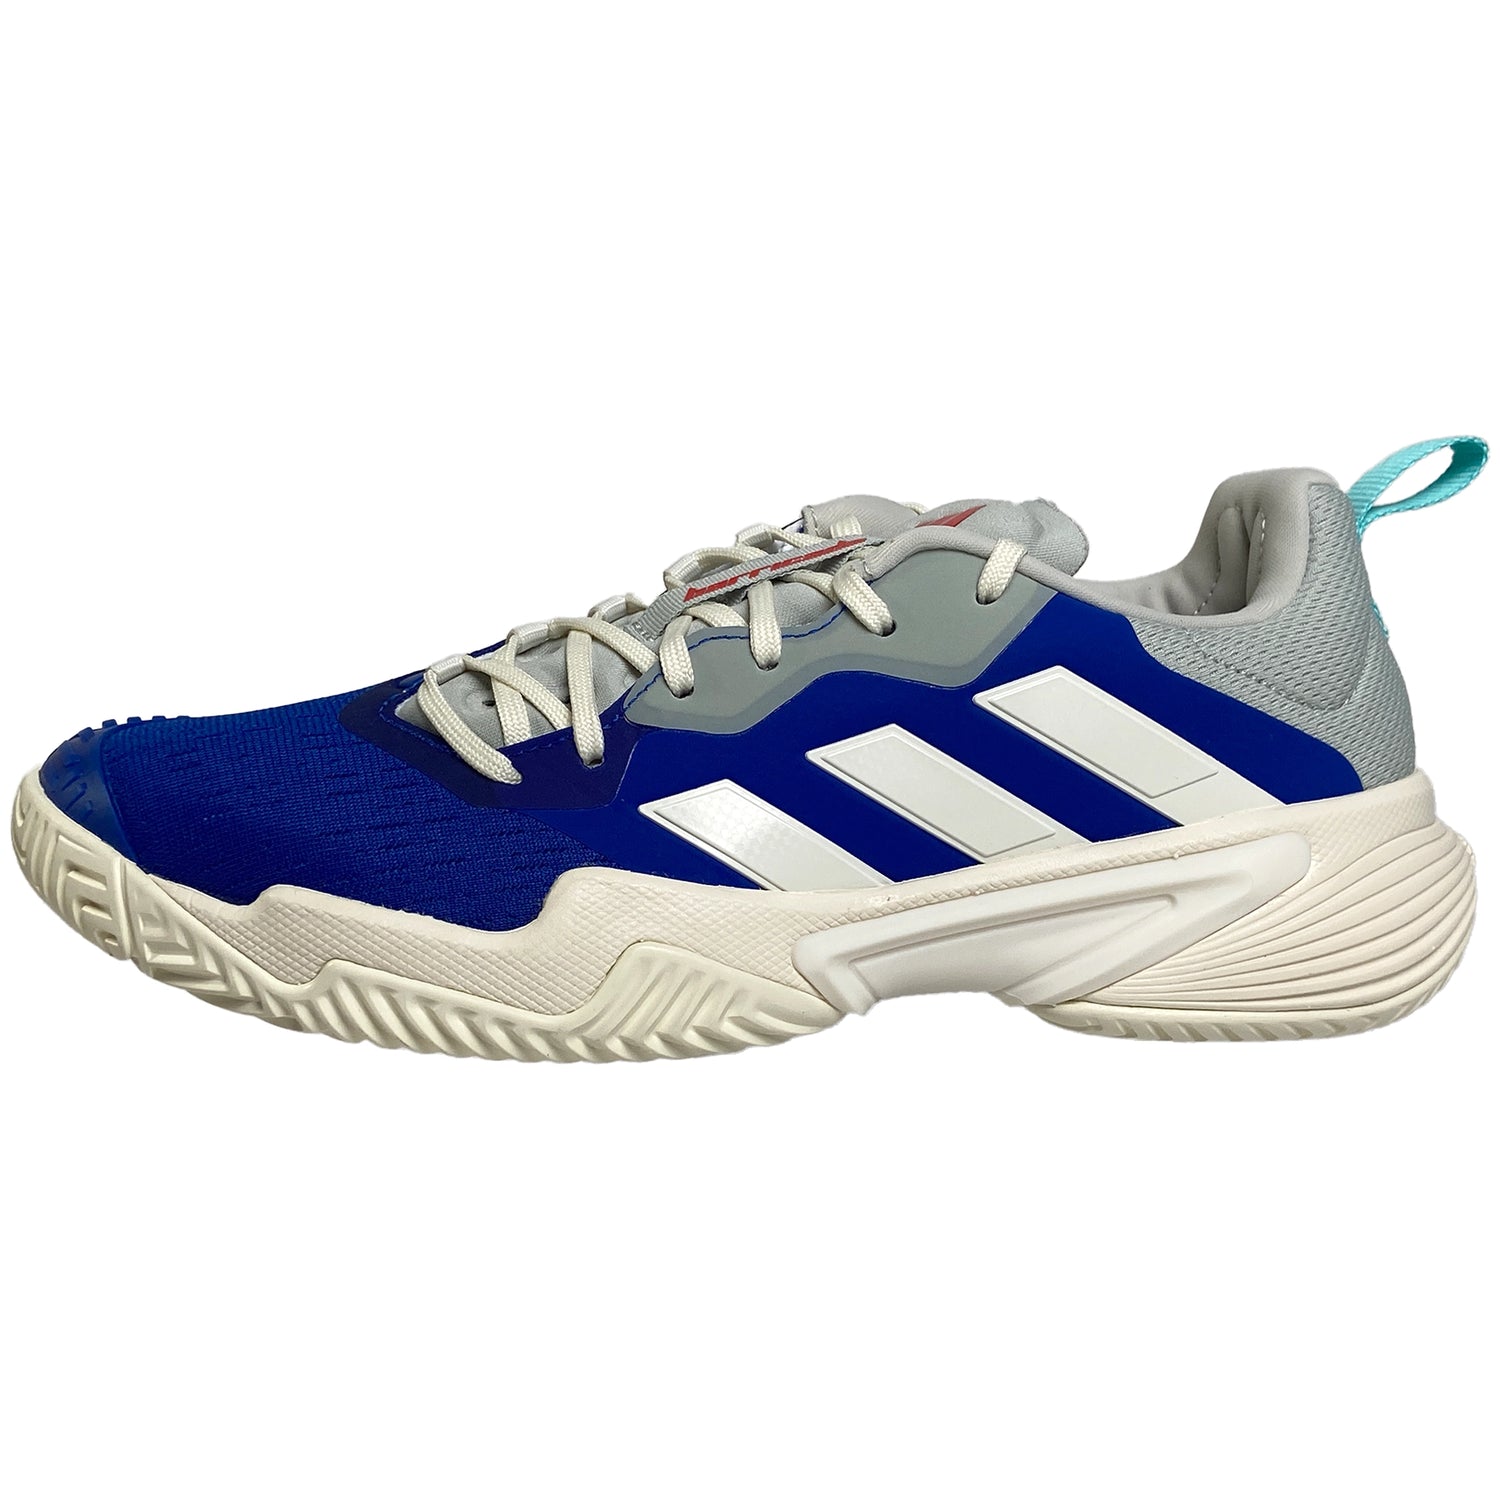 Adidas Shoes On Sale